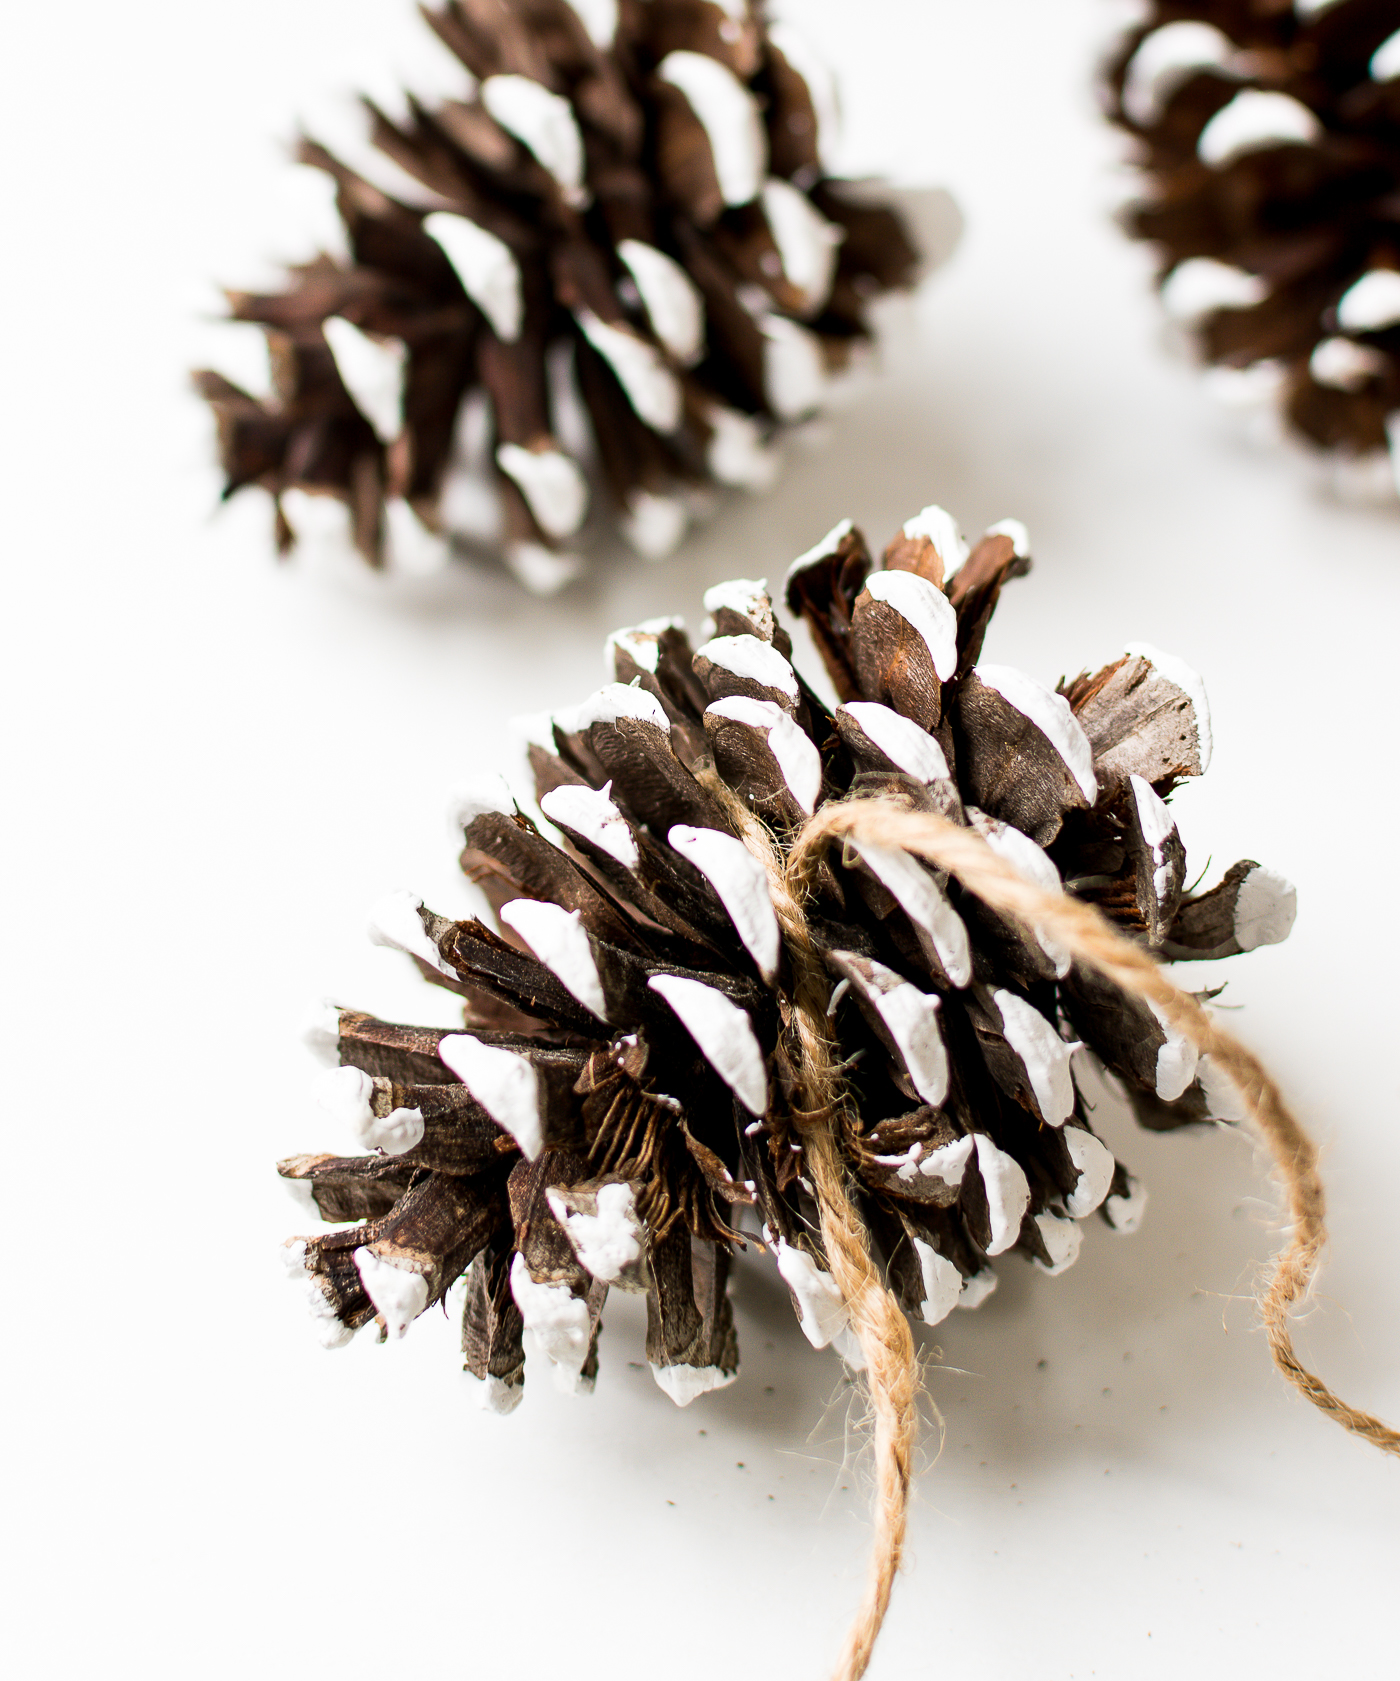 painted-pine-cones-how-to-paint-itallstartedwithpaint-com-7-1